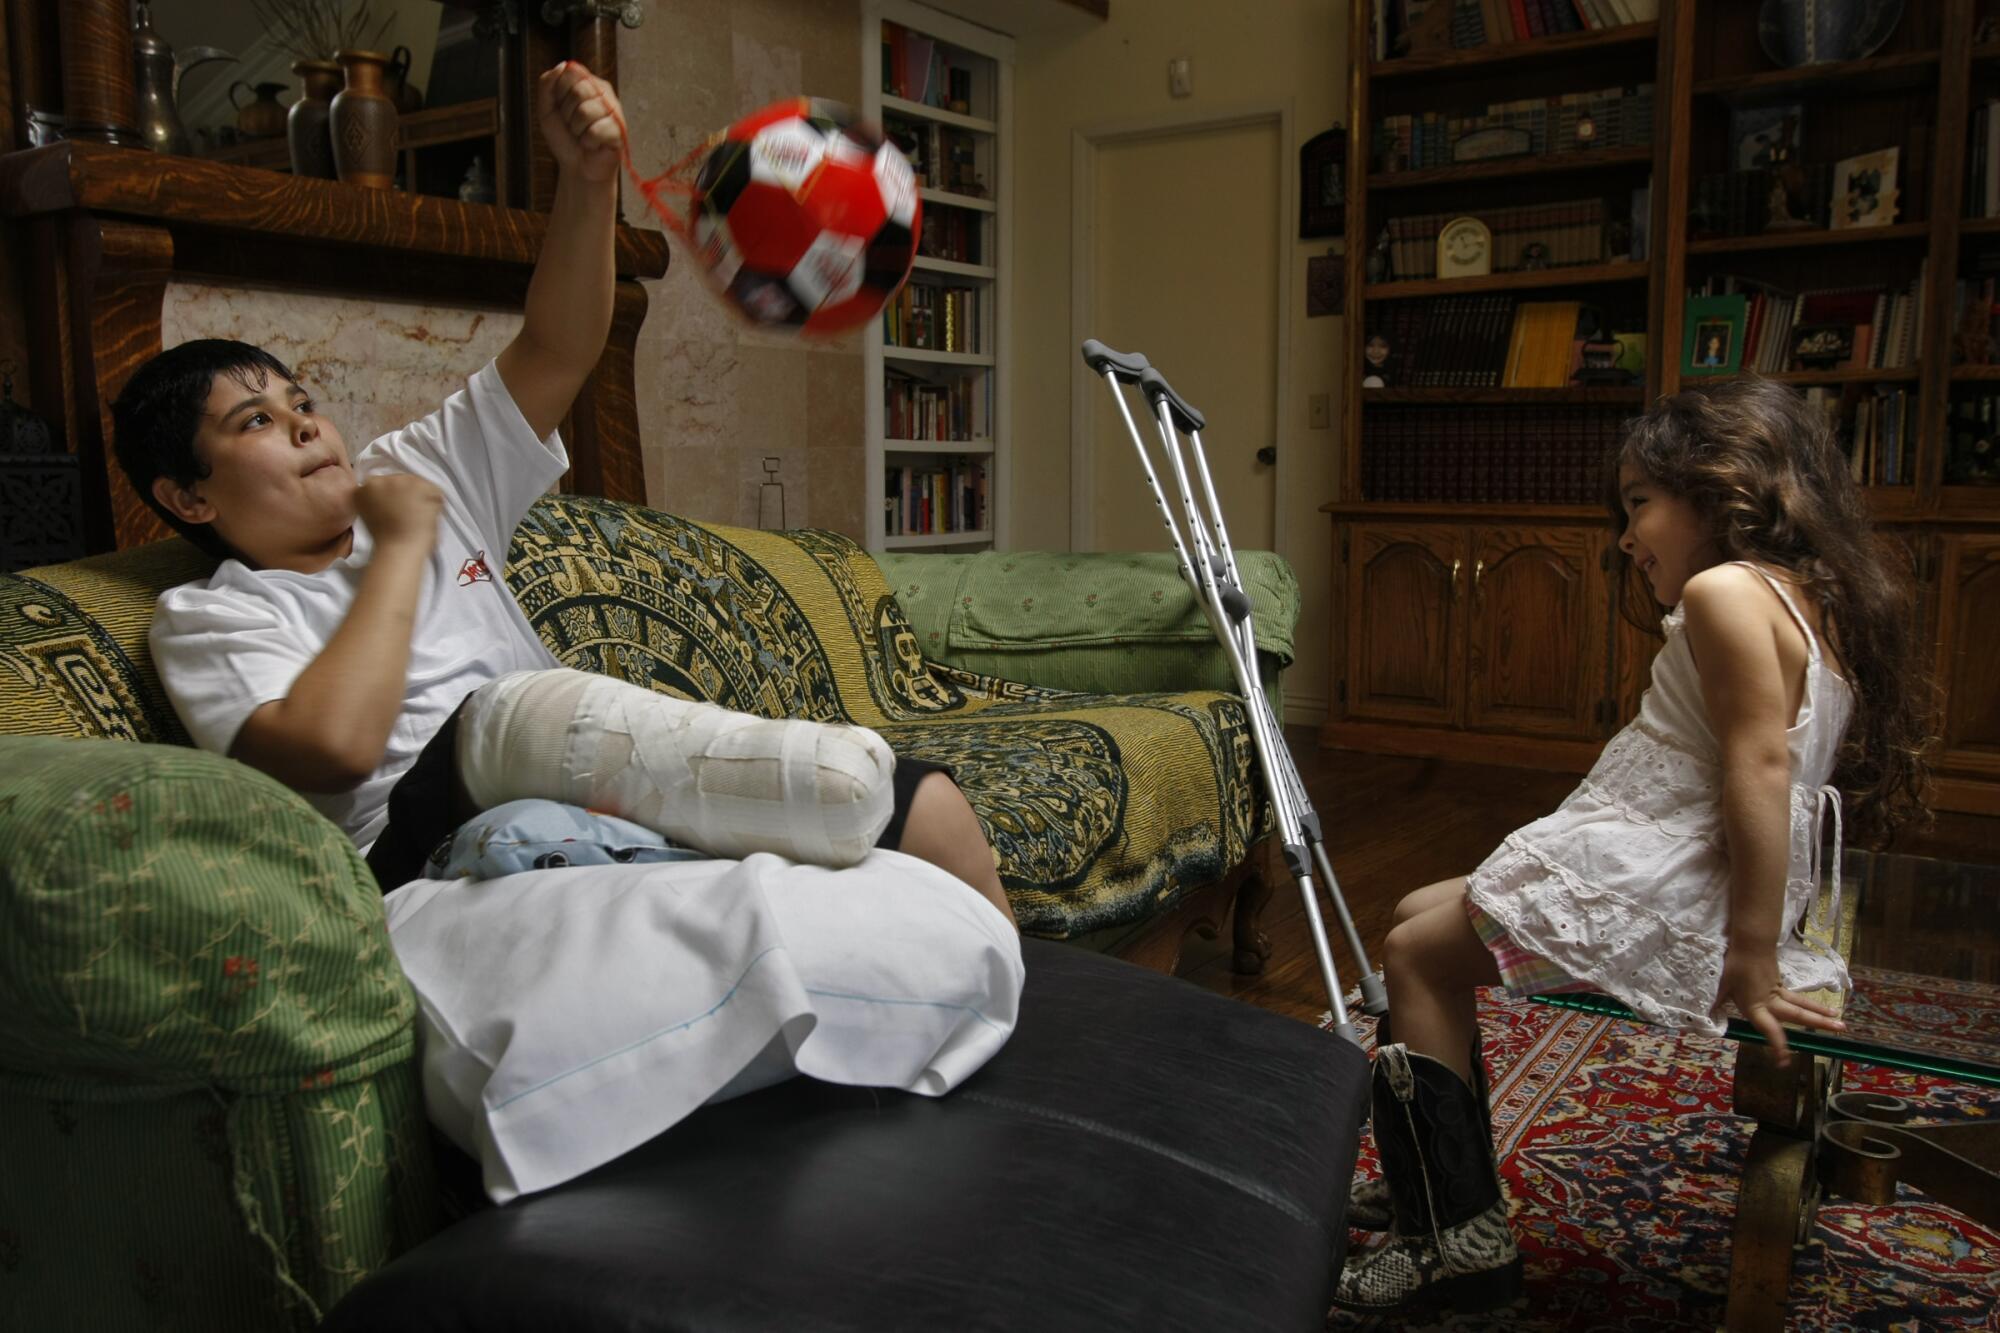 Cierra Abuhamad, 4, is delighted as Abdullah Alathamna plays with a soccer ball 